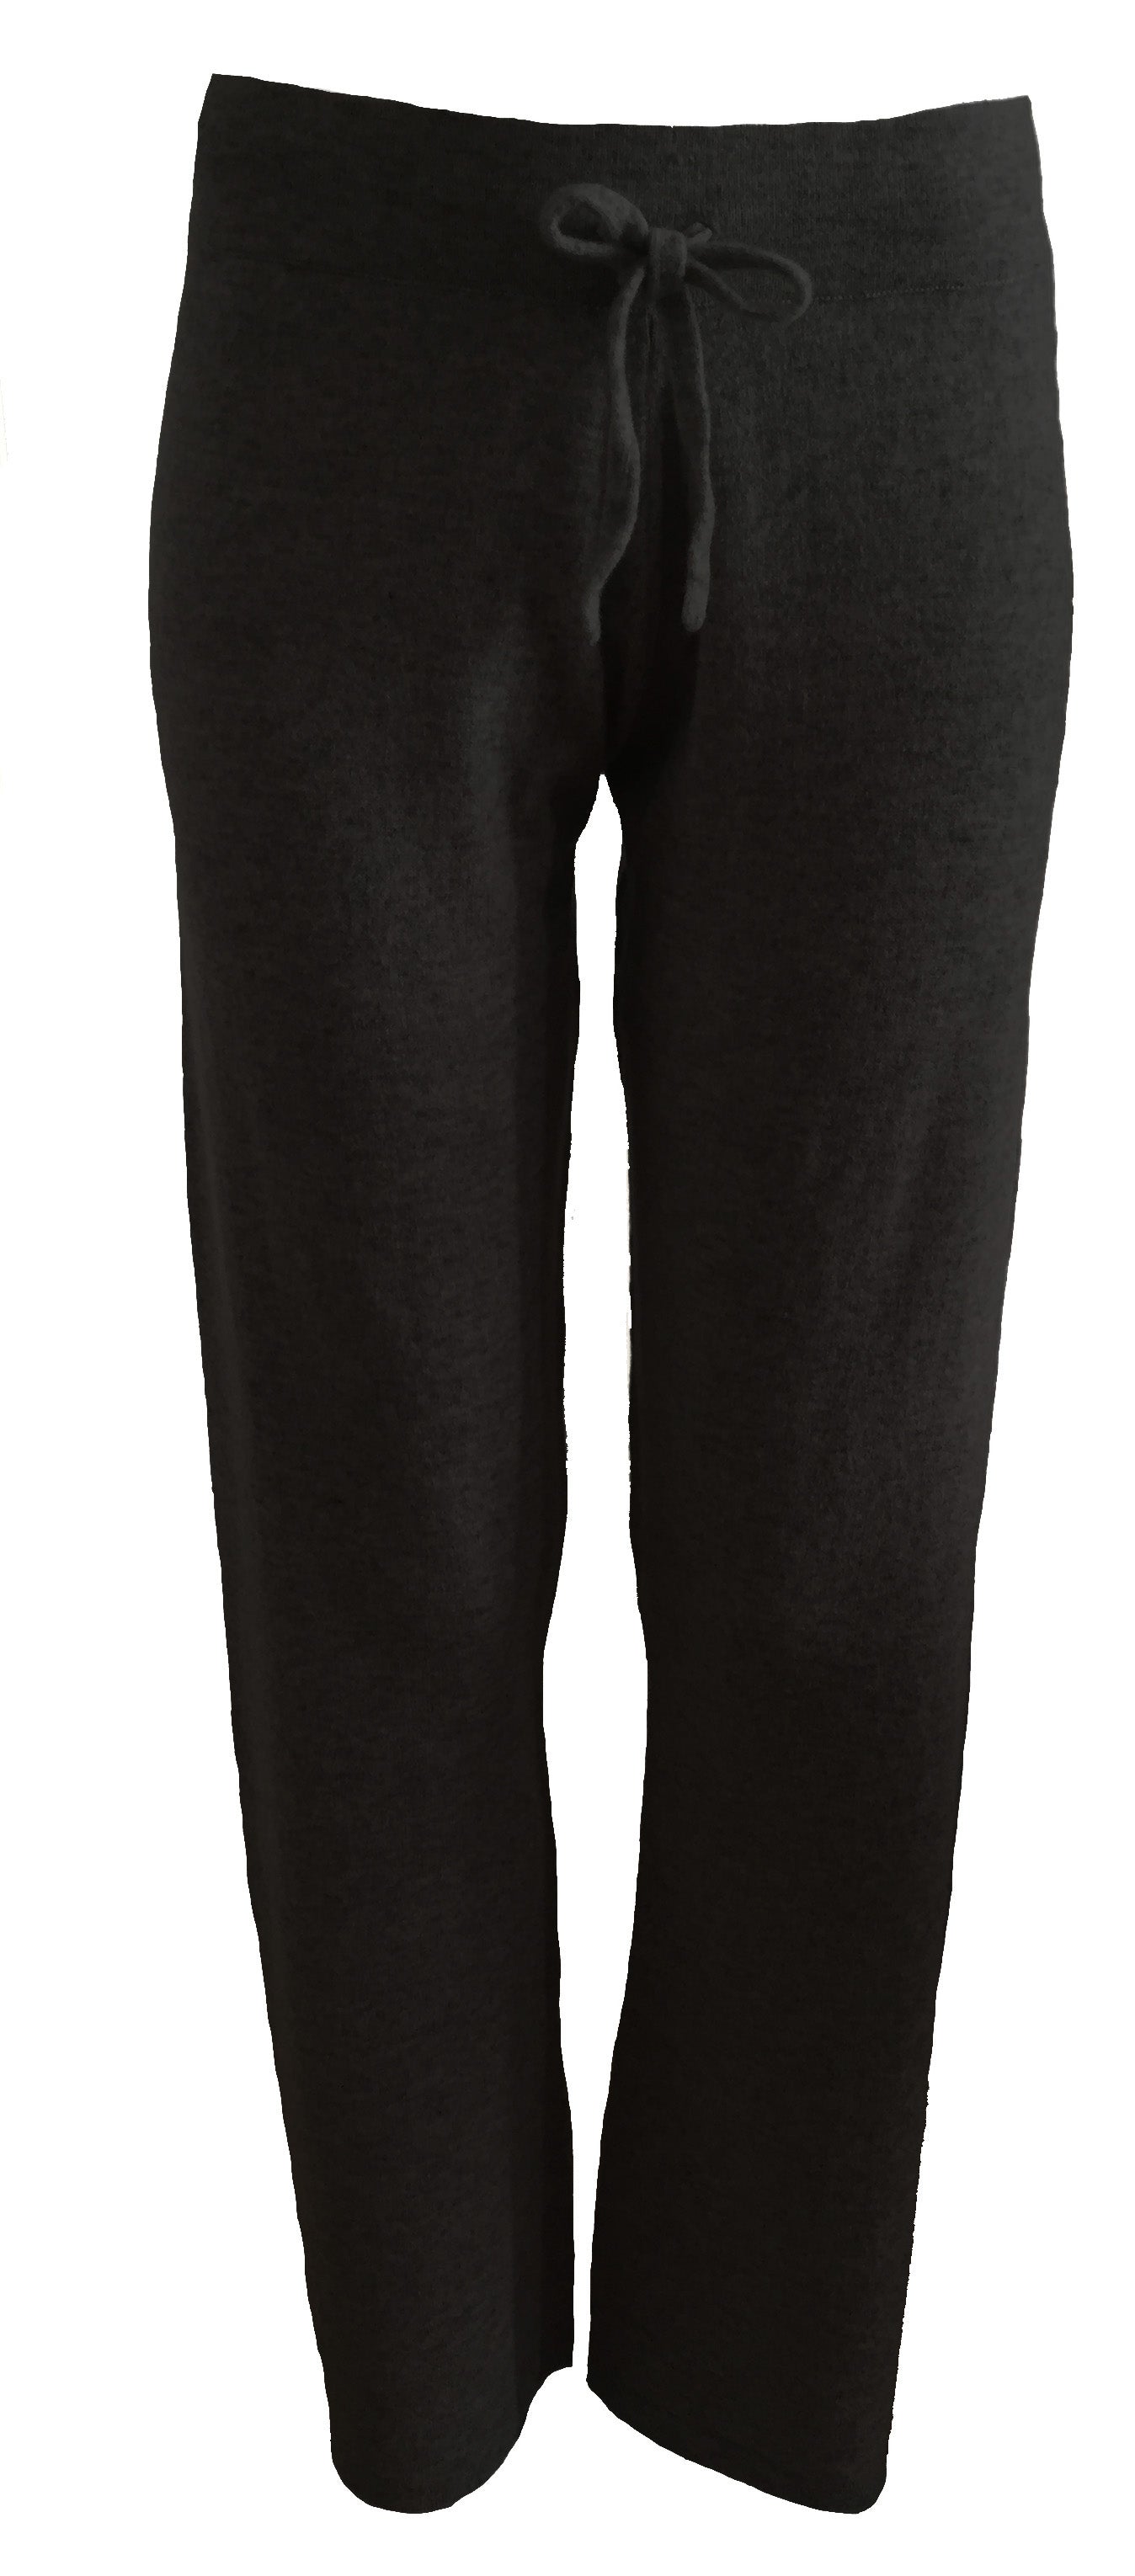 Cashmere lounge pant navy